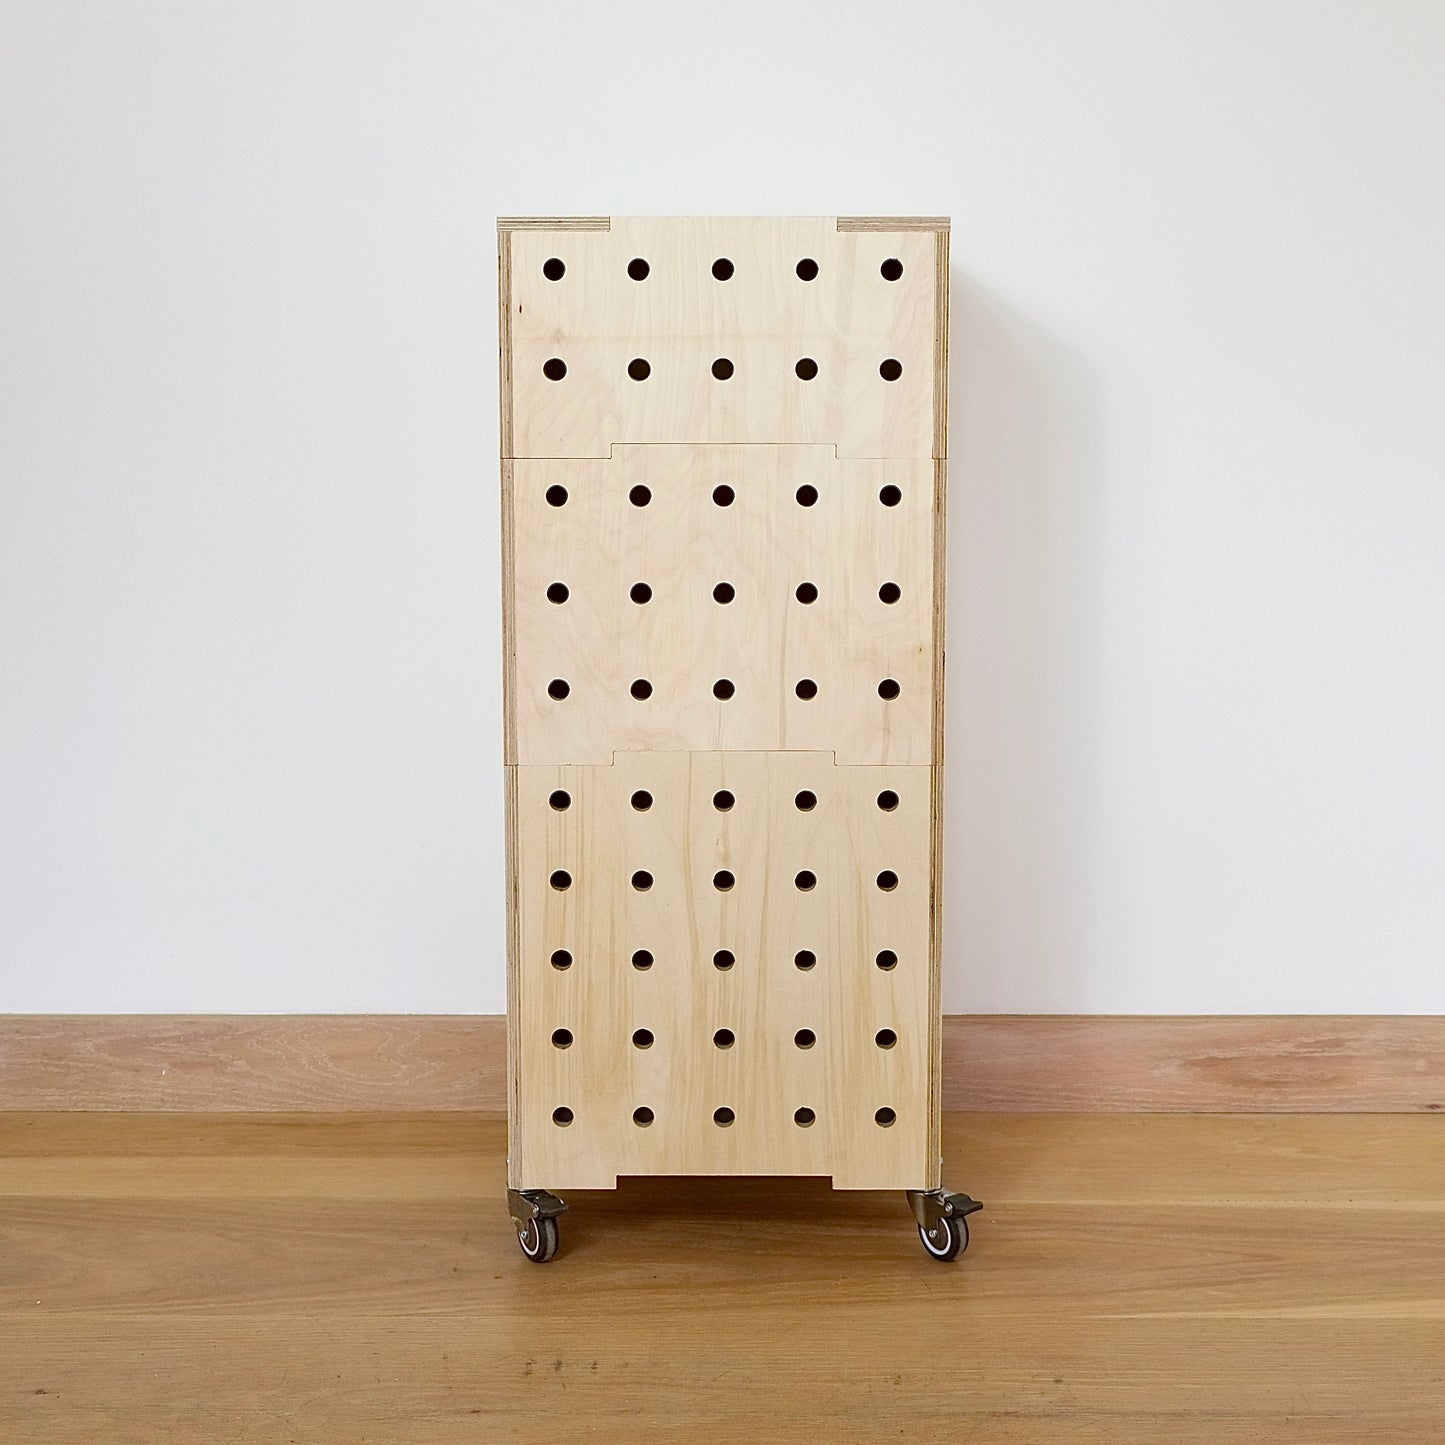 A set of 3 stacking pale birch plywood crates with 5 rows of drilled holes running vertical. The crates are set on 4 castors on a wooden floor against a white wall